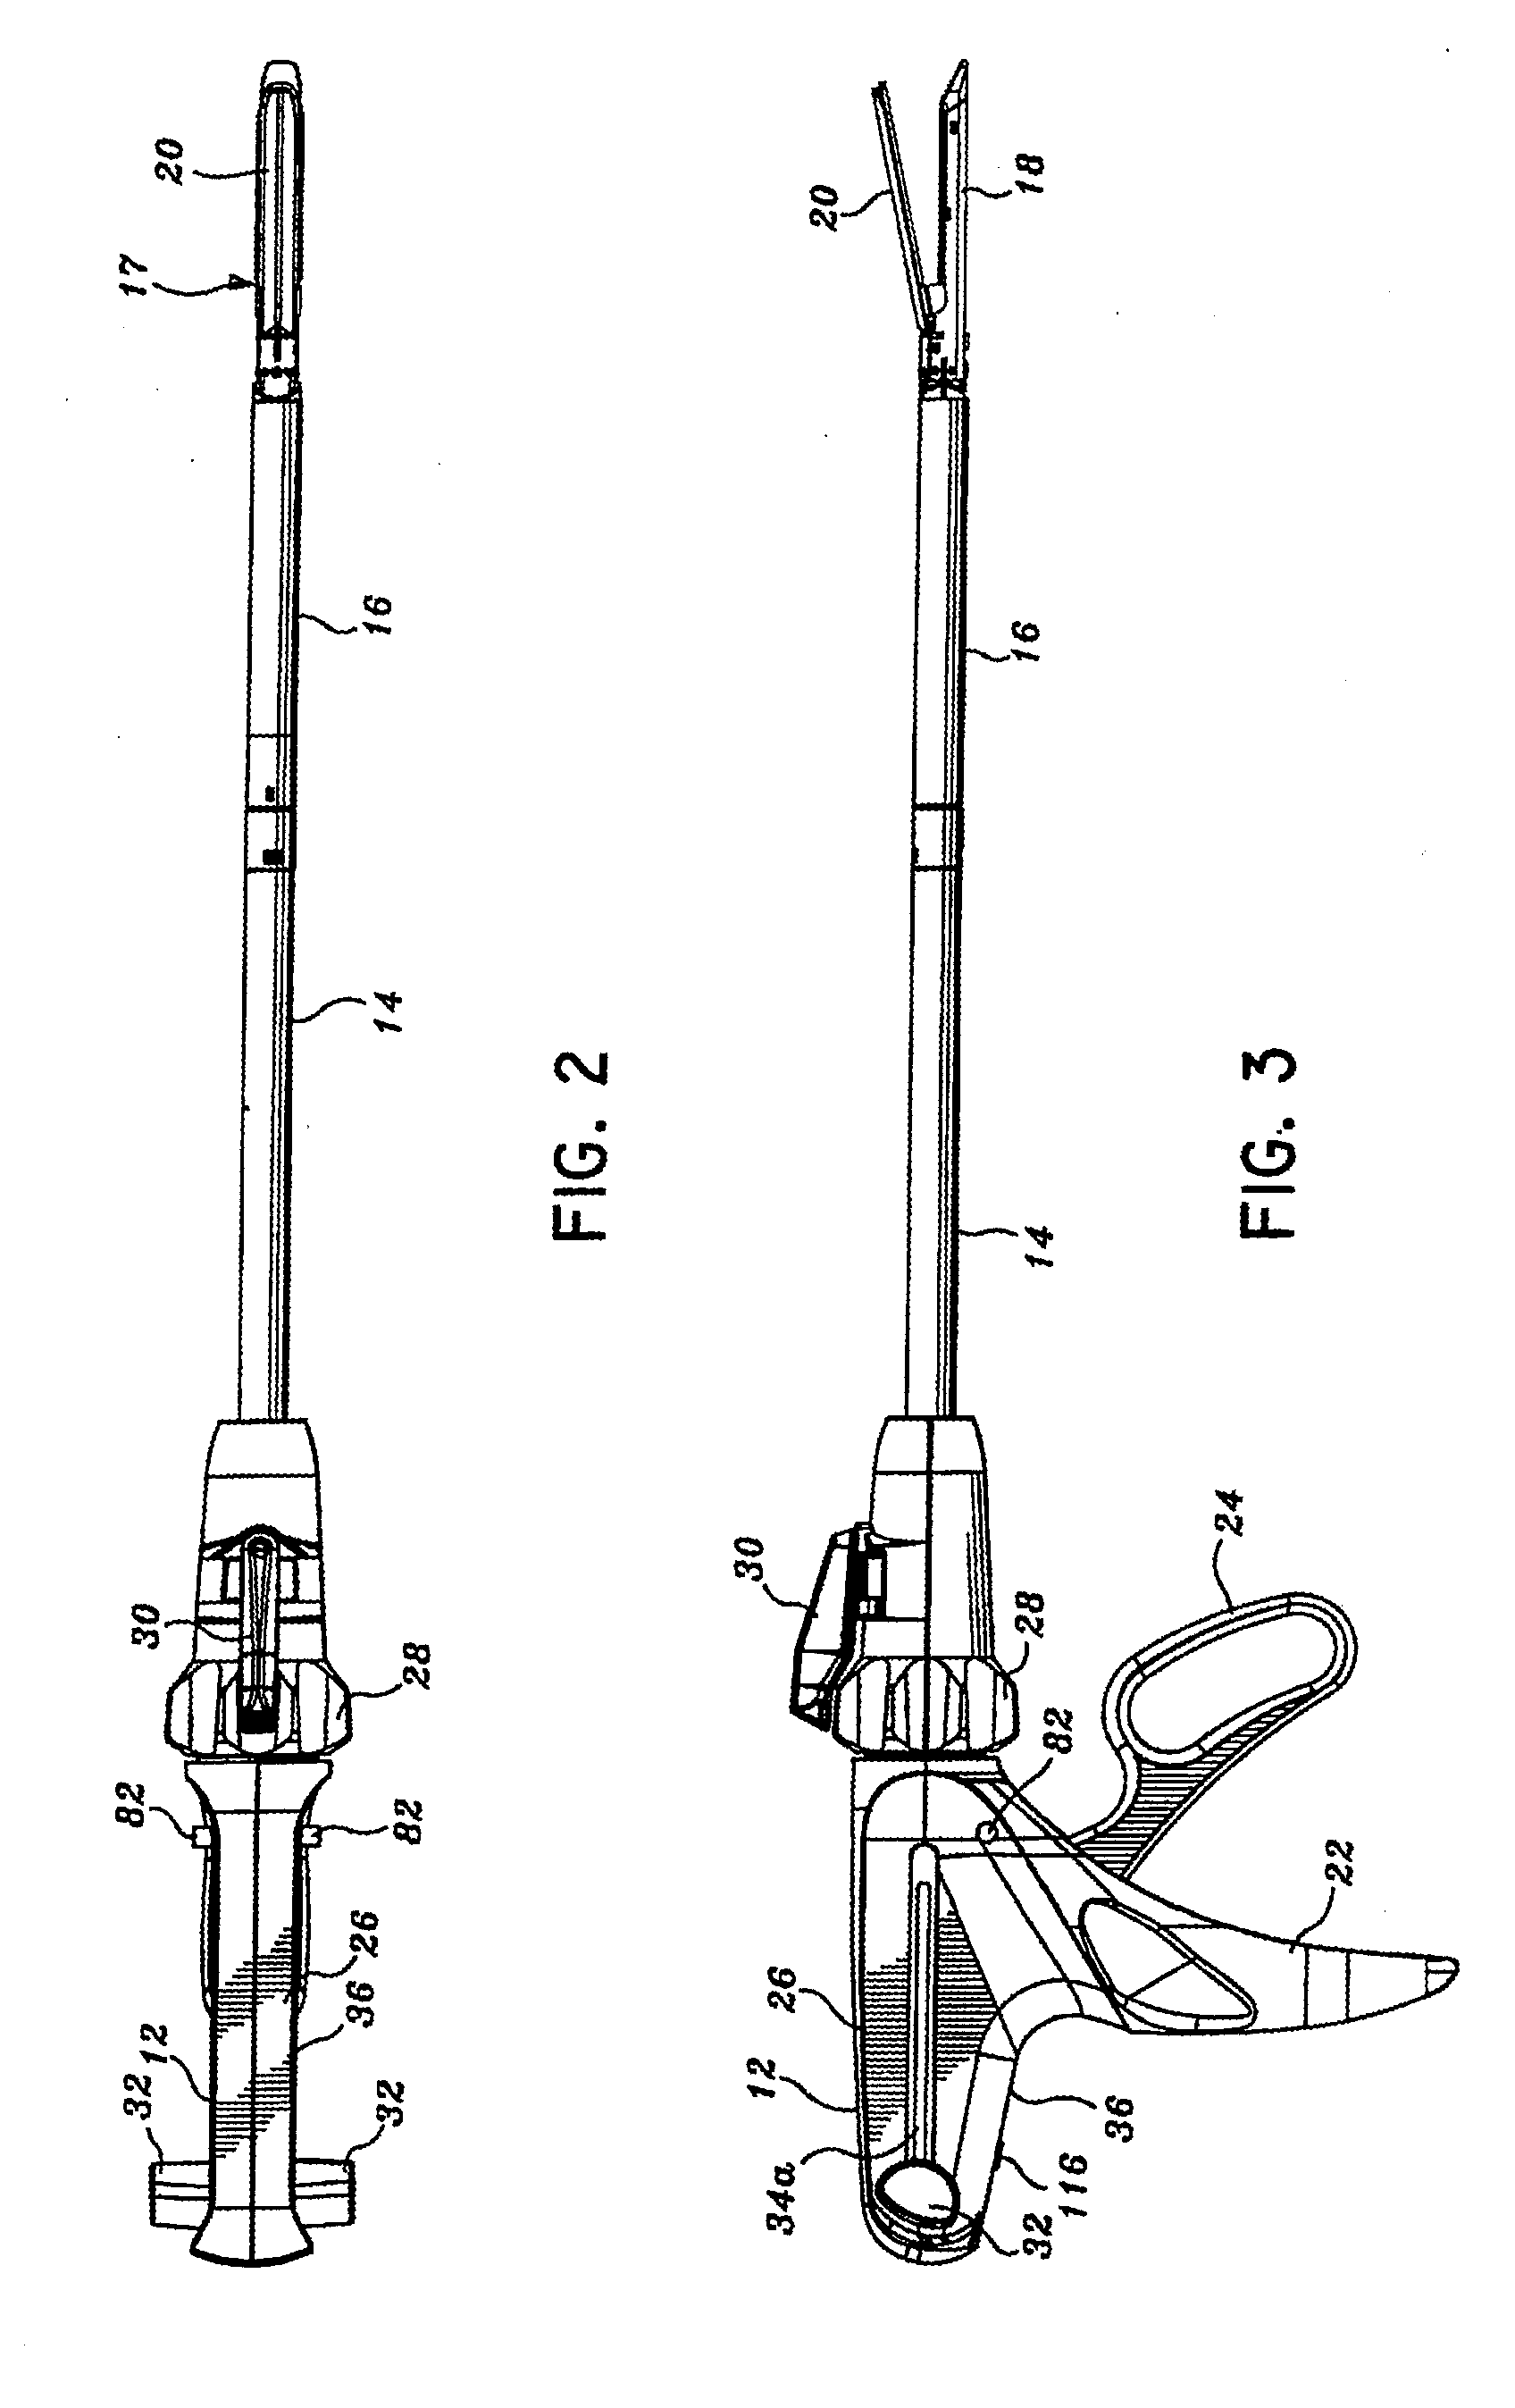 End effector coupling arrangements for a surgical cutting and stapling instrument